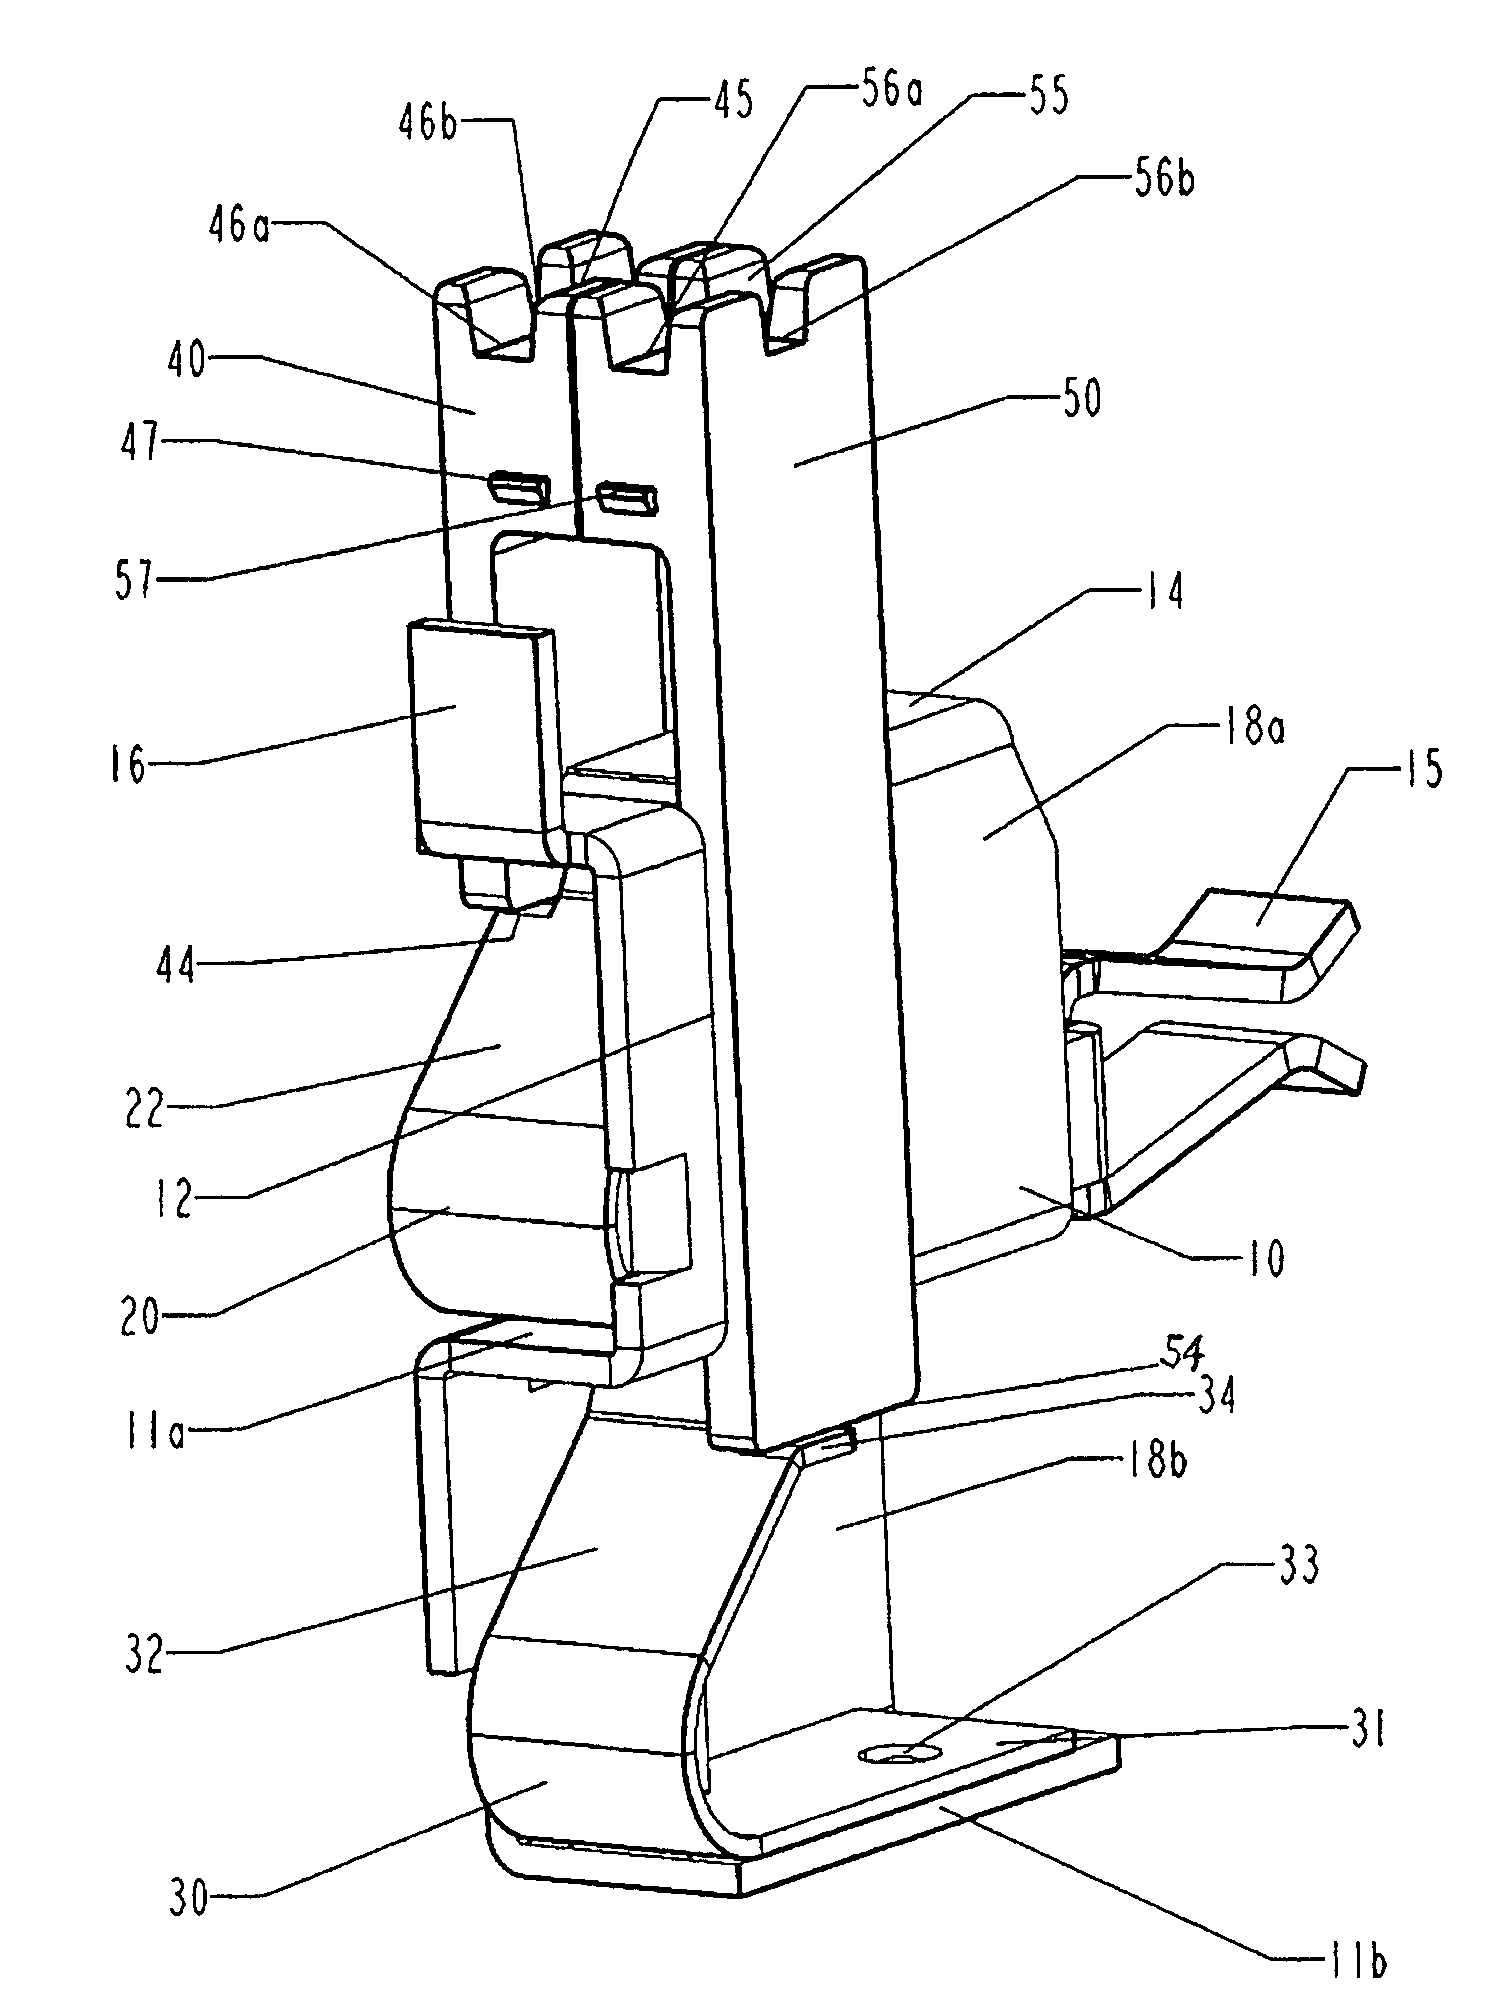 Terminal block for connecting electrical conductors